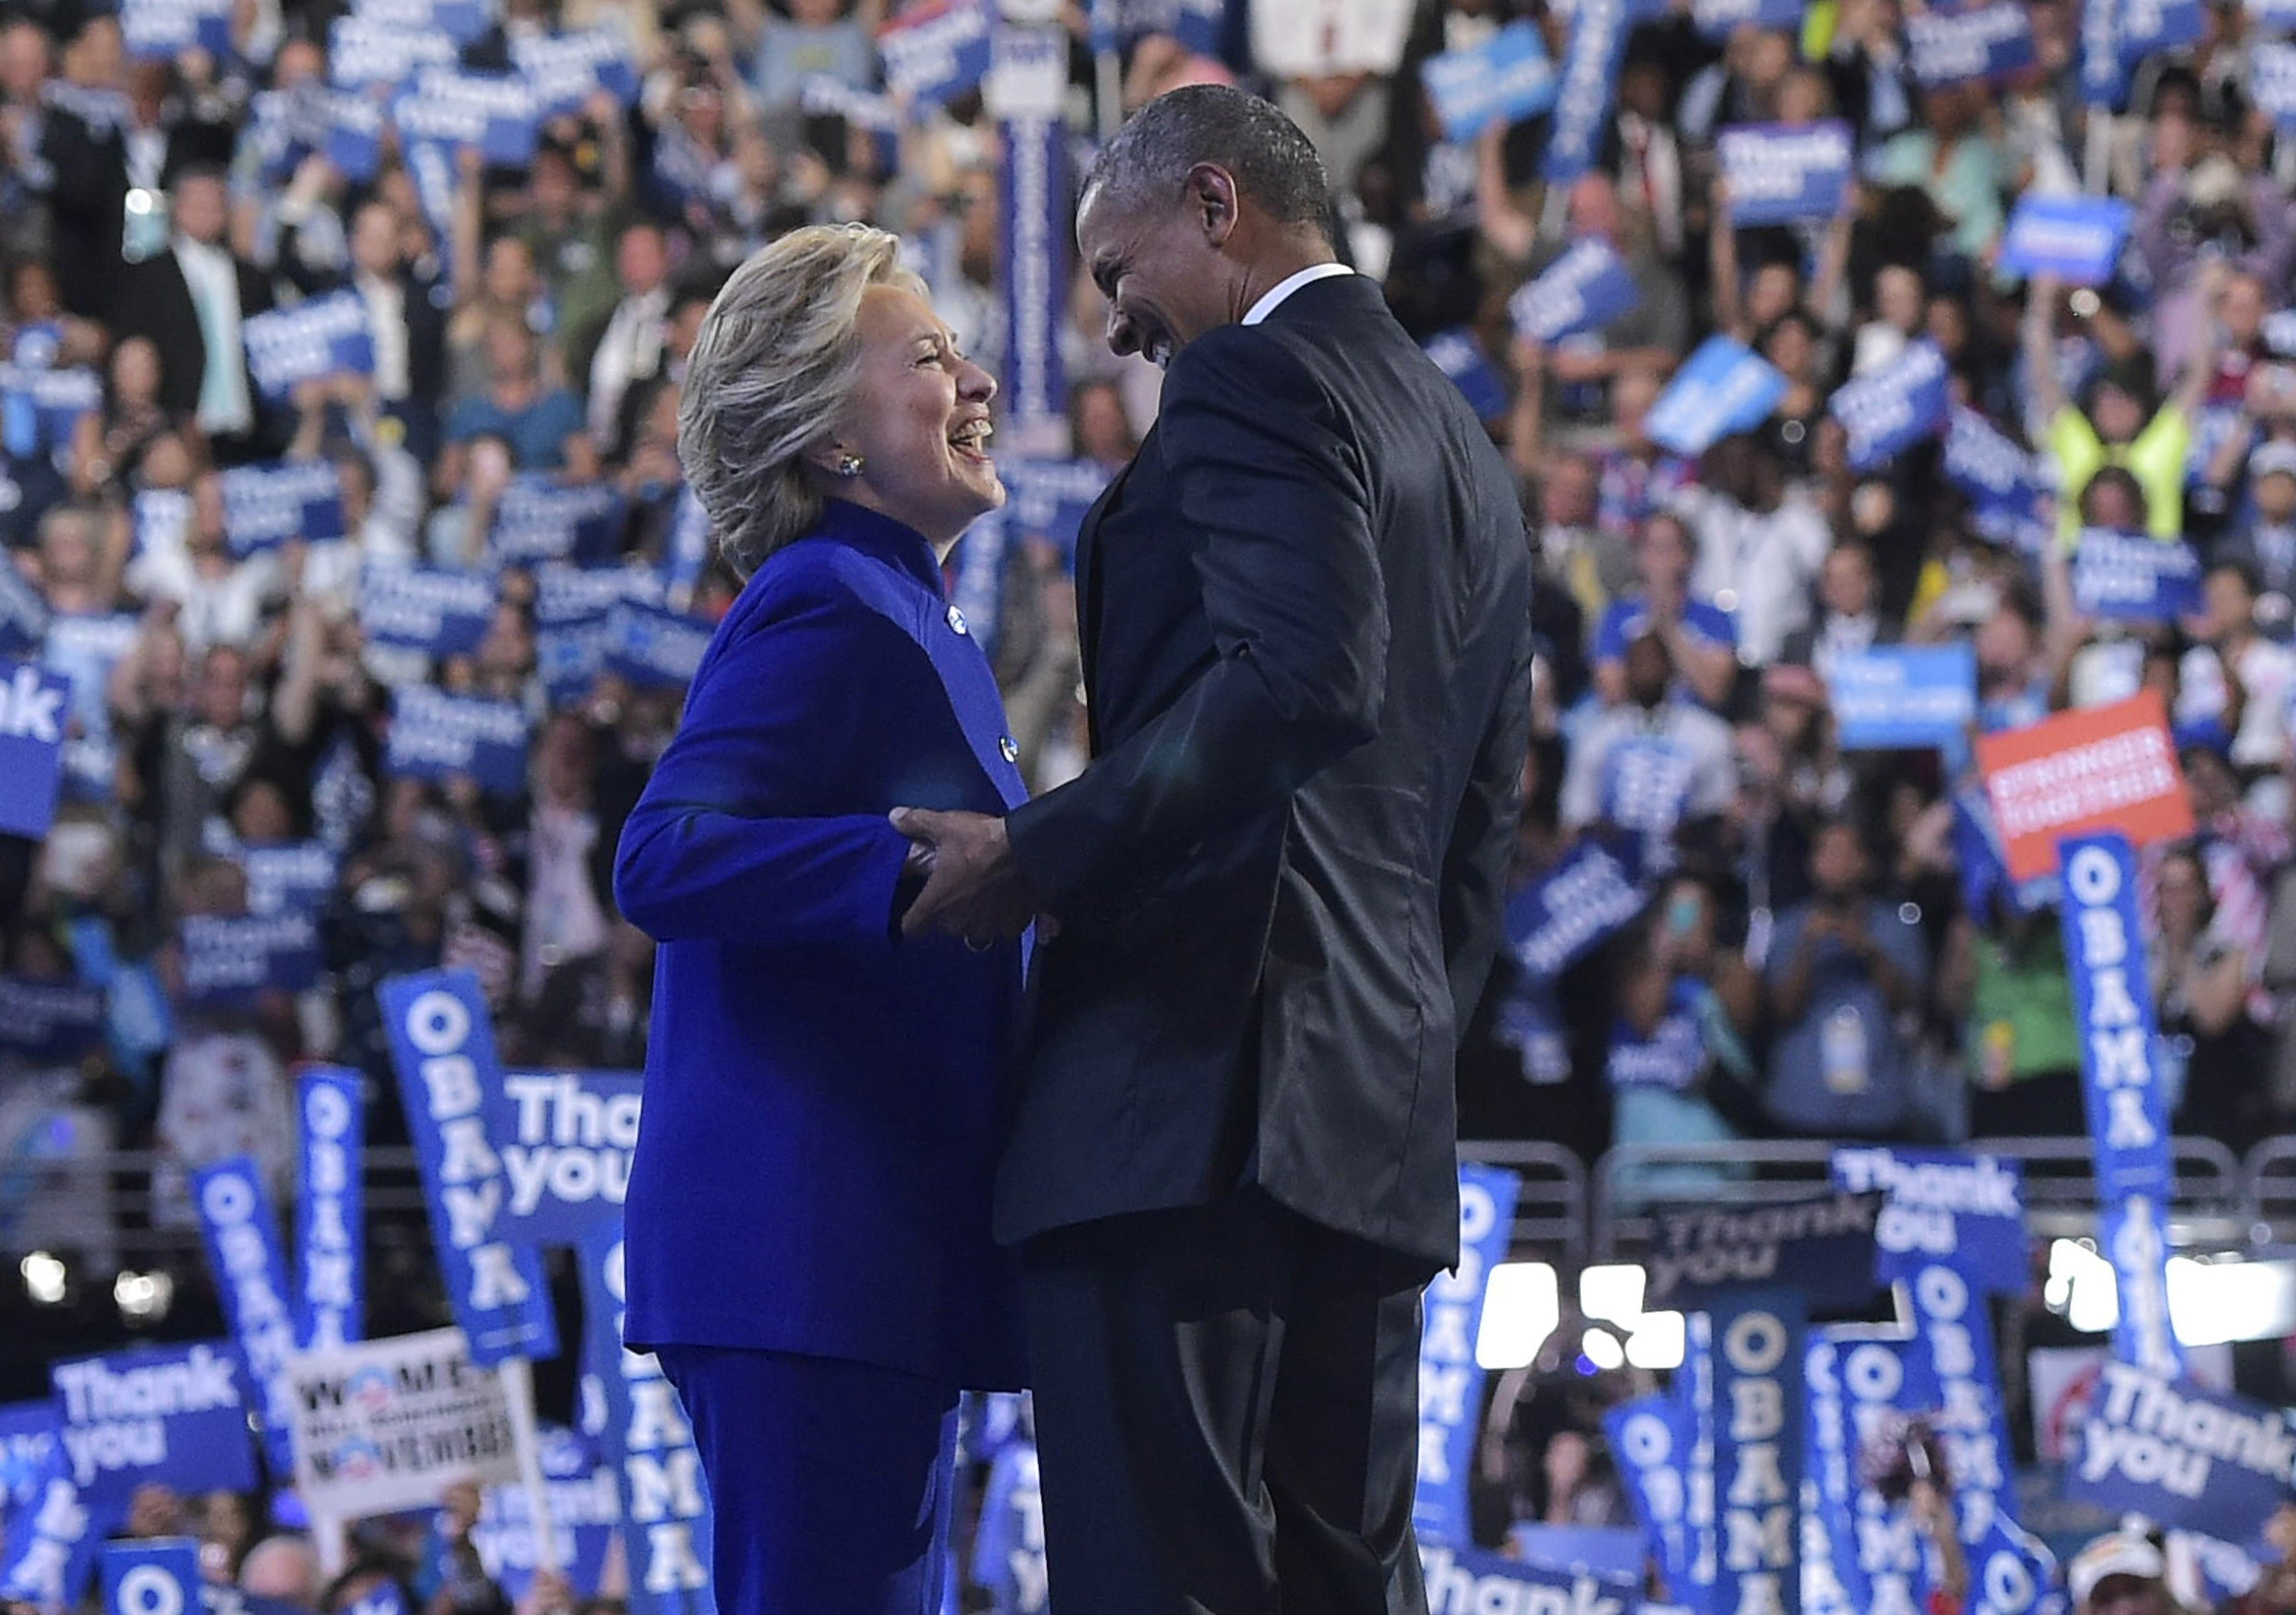 TOPSHOT - US President Barack Obama is joined by US Democratic presidential candidate Hillary Clinton after his address to the Democratic National Convention at the Wells Fargo Center in Philadelphia, Pennsylvania, July 27, 2016. / AFP PHOTO / MANDEL NGAN